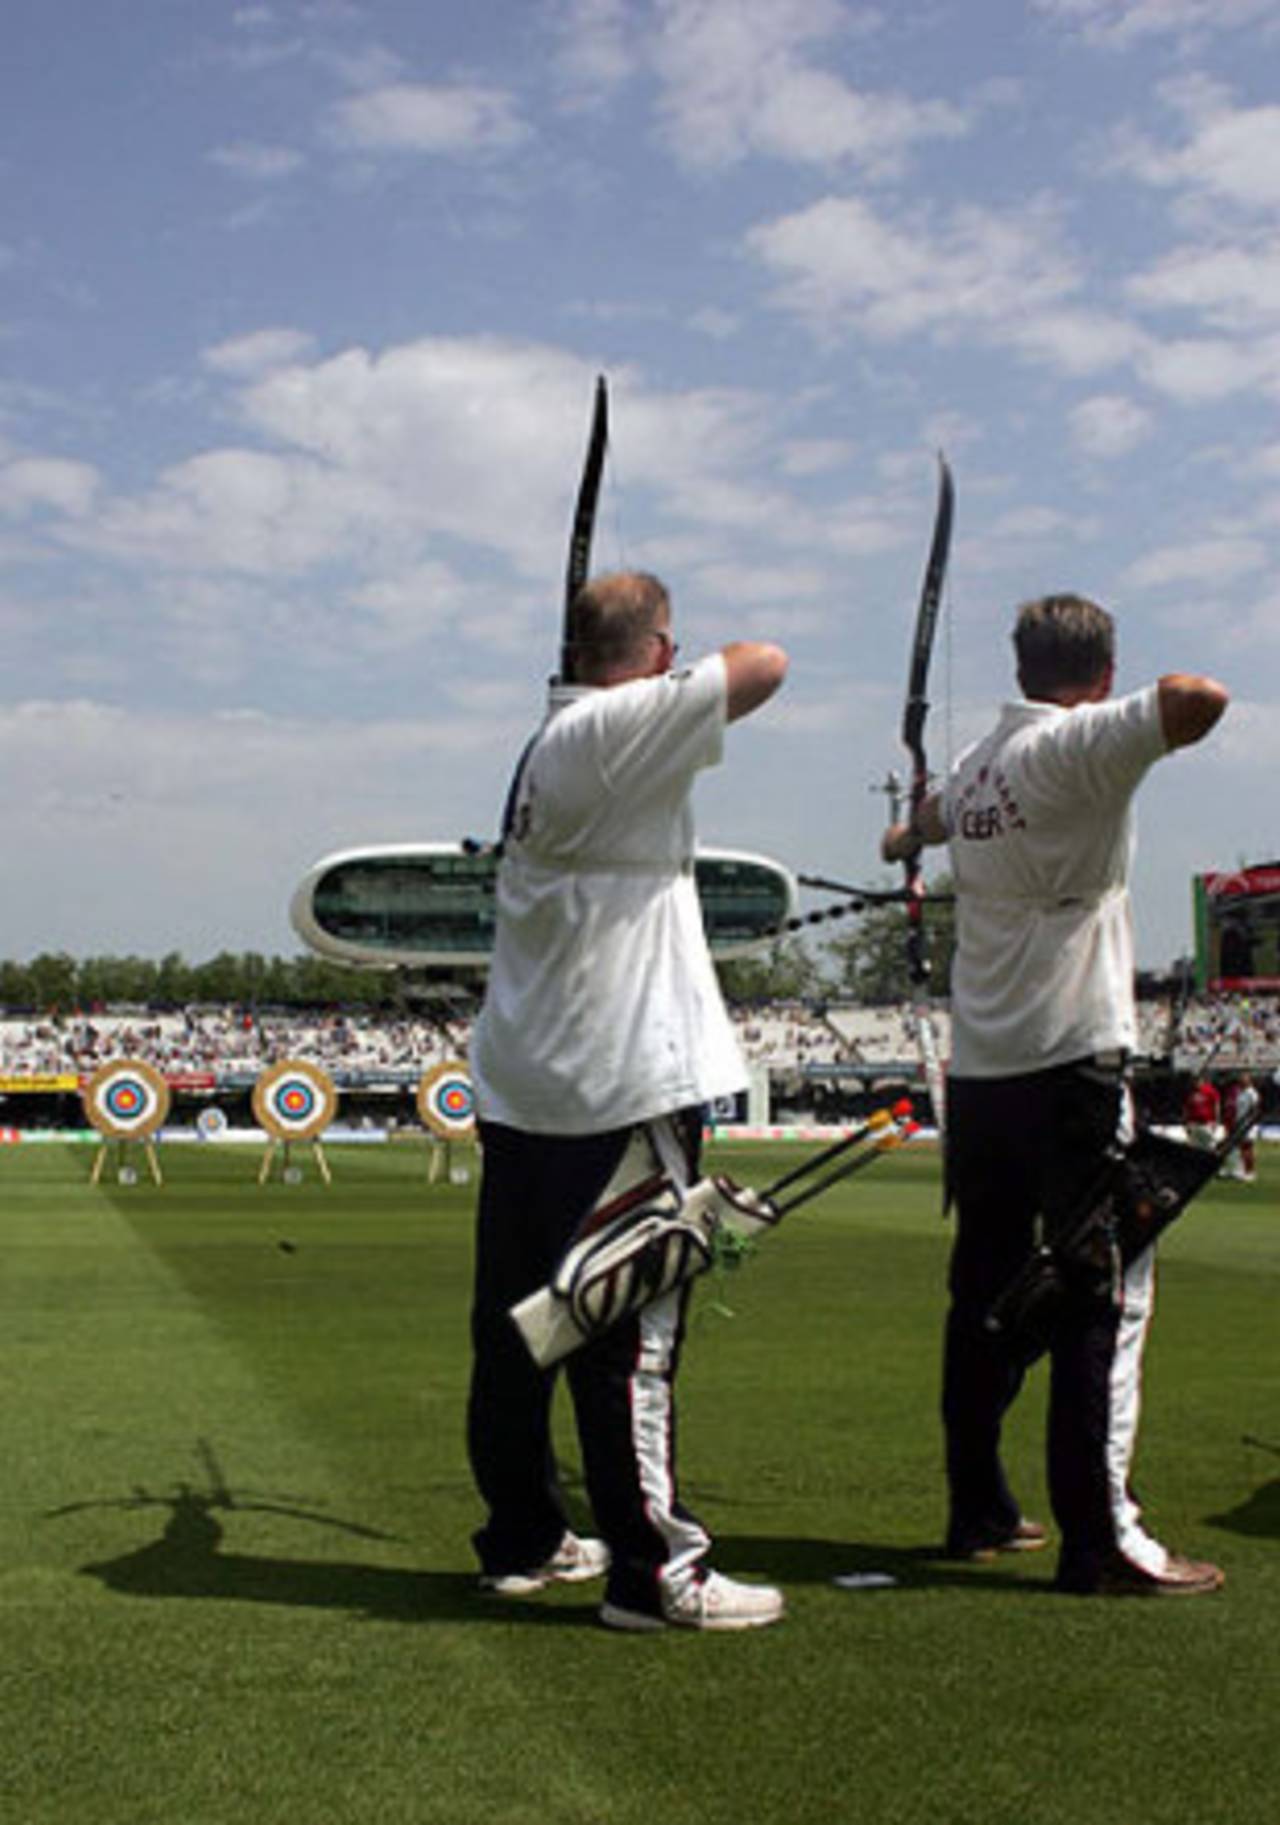 Olympic archery will take place at Lord's in 2012